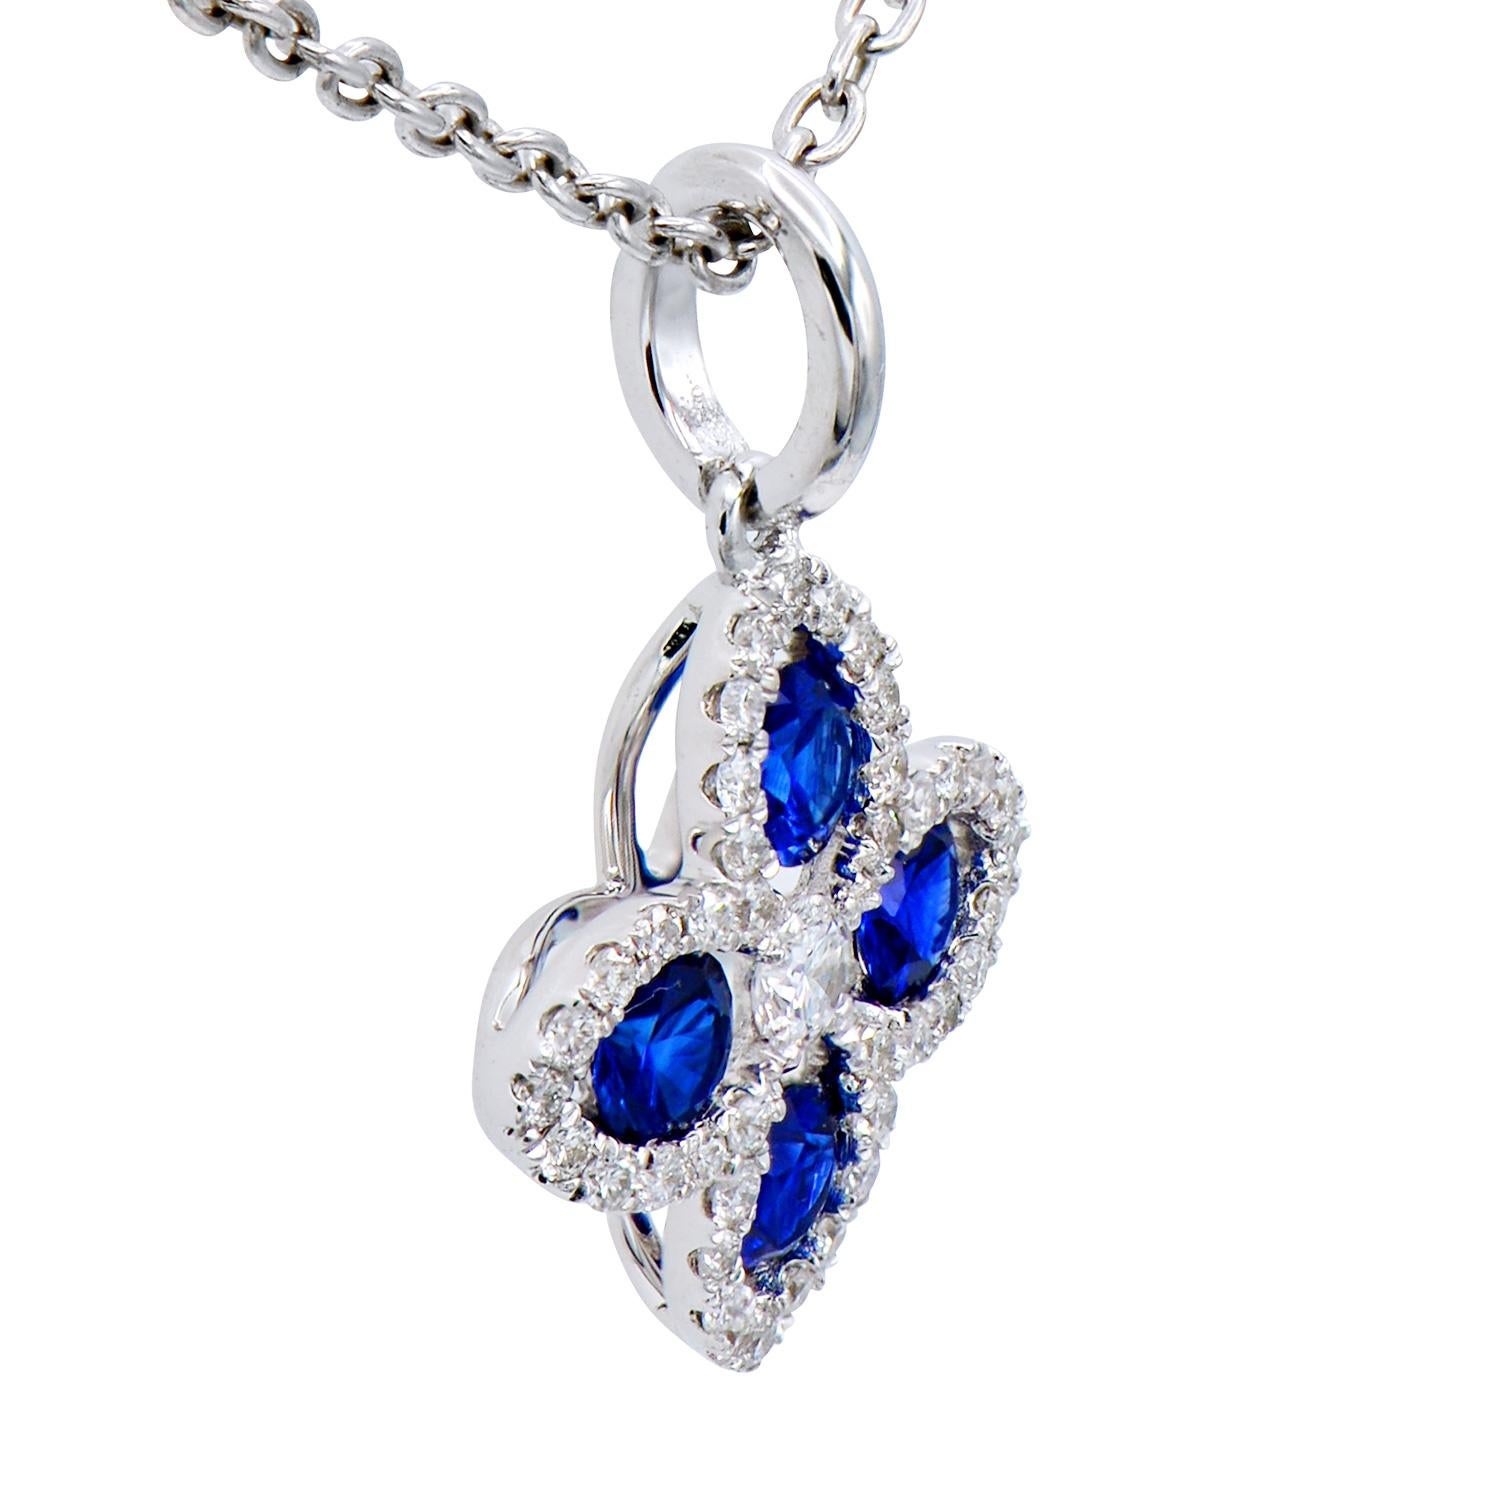 This beautiful pendant is made from 4 sapphires totaling 0.37 carats which are surrounded by 41 round VS2, G color diamonds totaling 0.14 carats. Together they form a lovely flower or four-leaf shape that is classic and timeless. The pendant is made